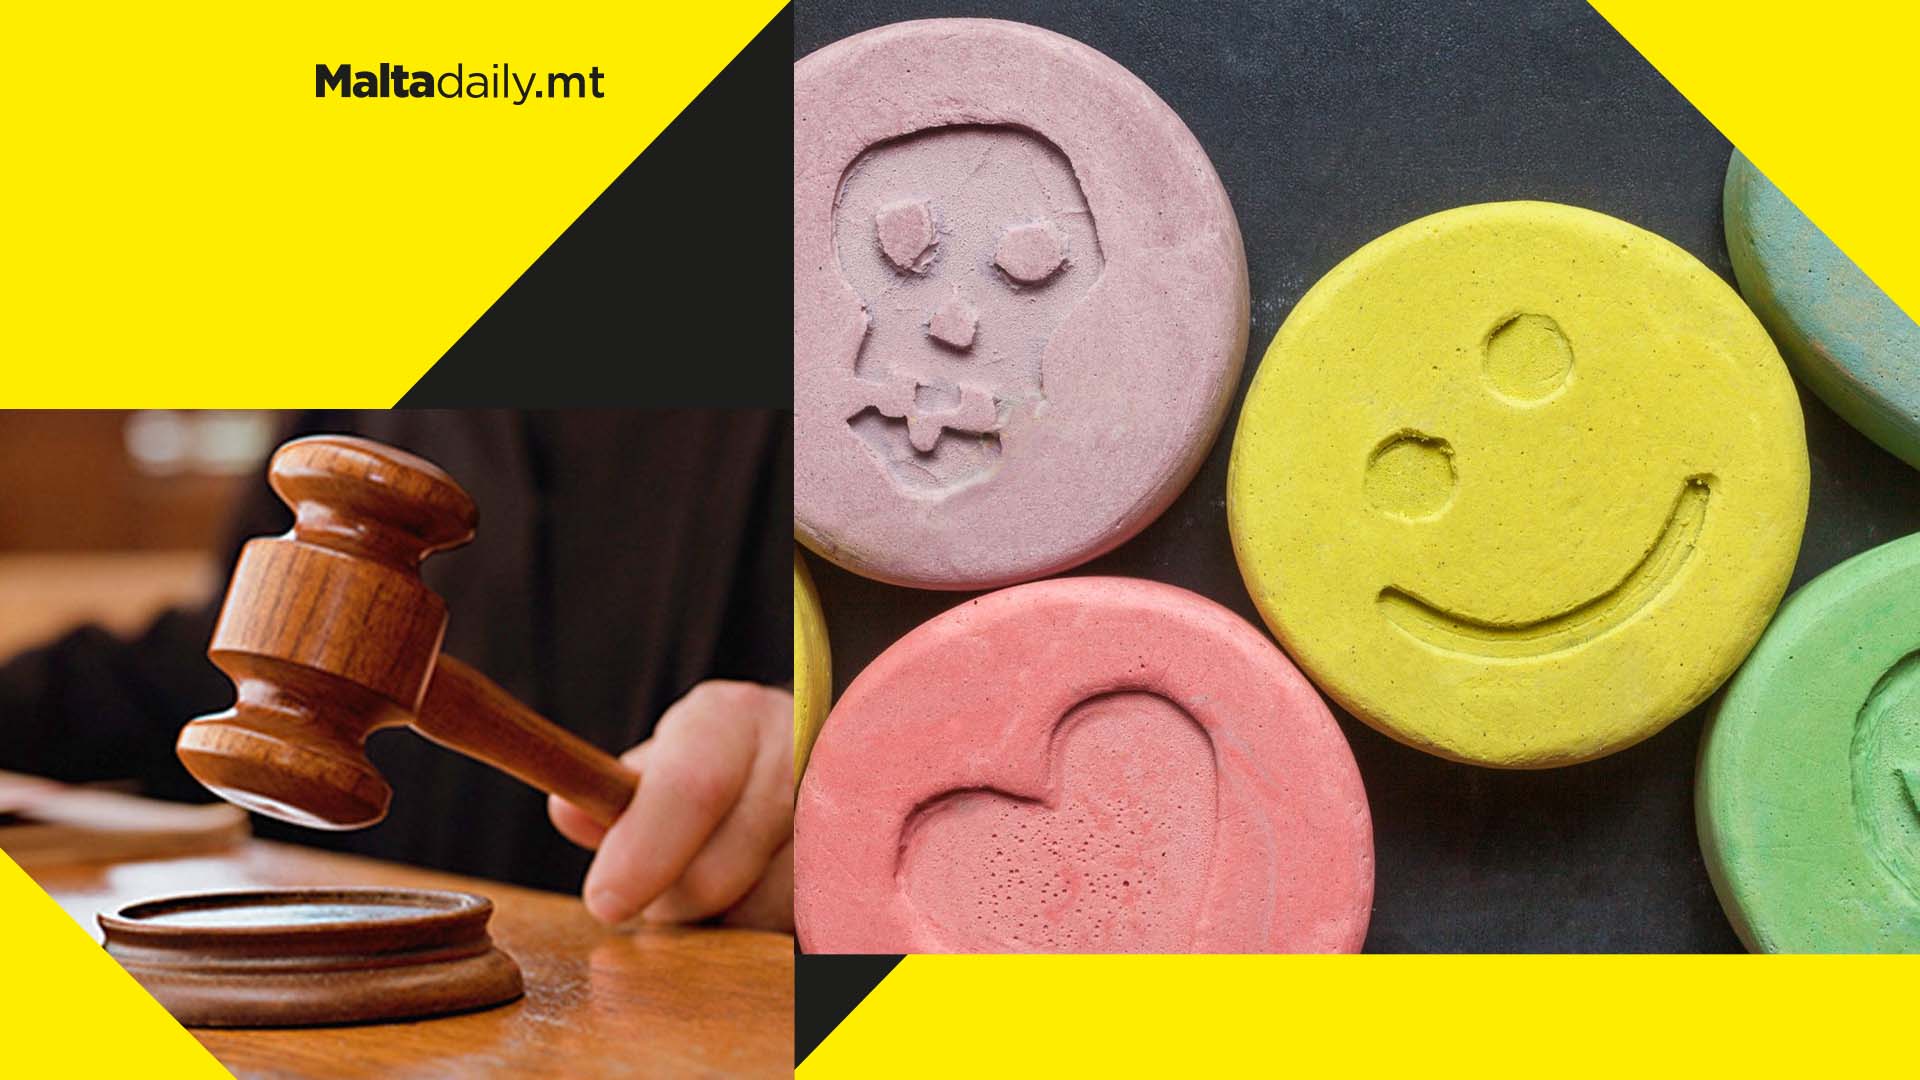 Man fined €900 for possessing eight ecstasy pills after 12 years